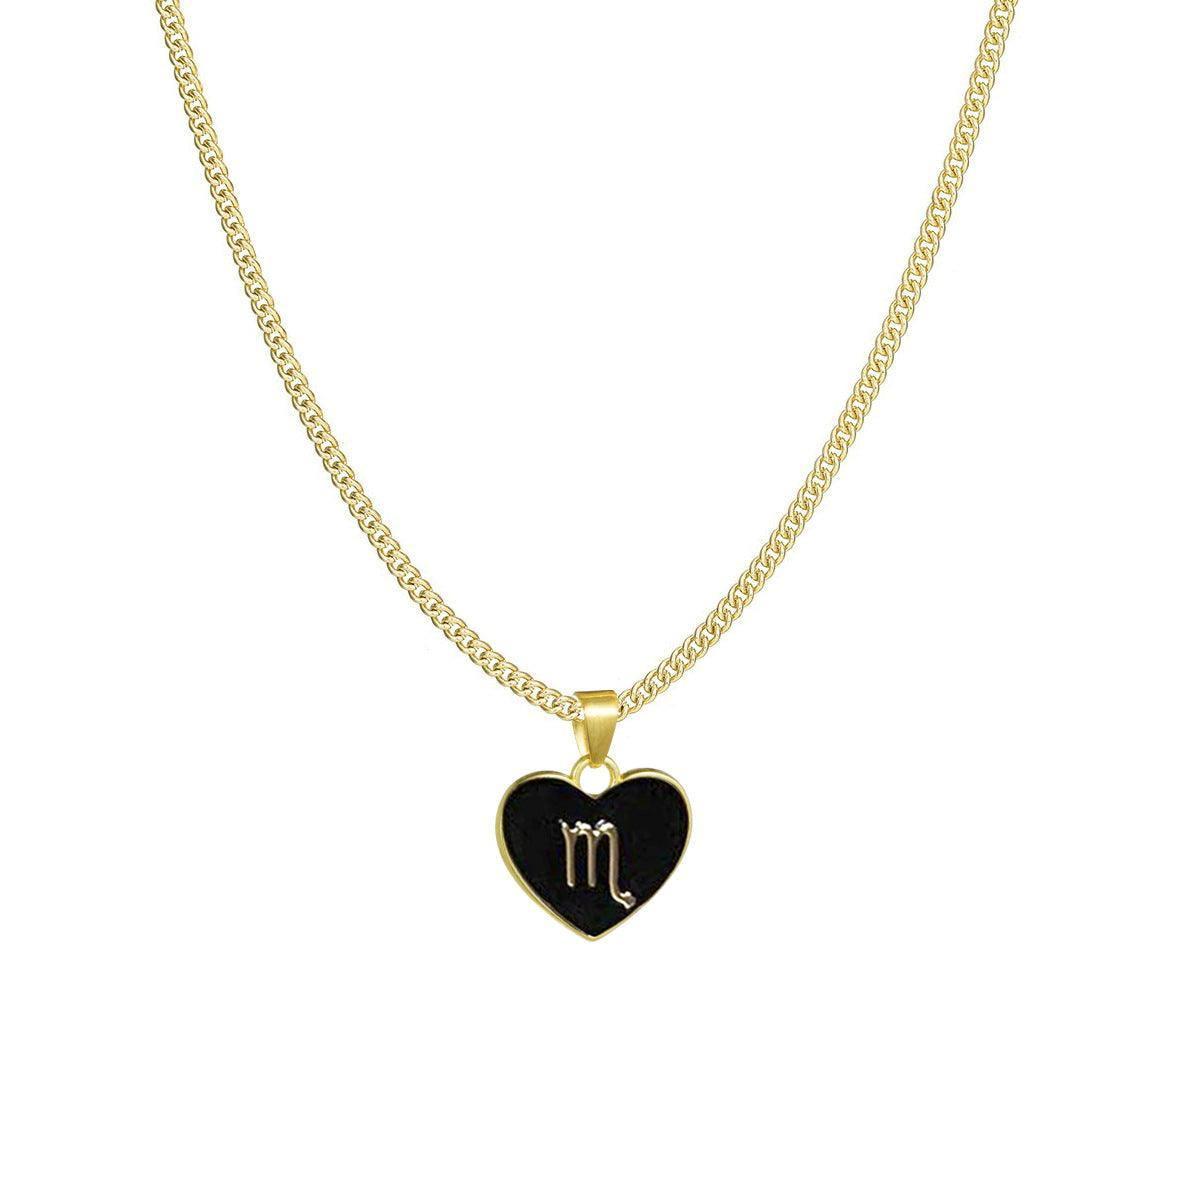 Trendy Zodiac Sign Necklaces for Stylish Astrology Fans-Scorpio-13